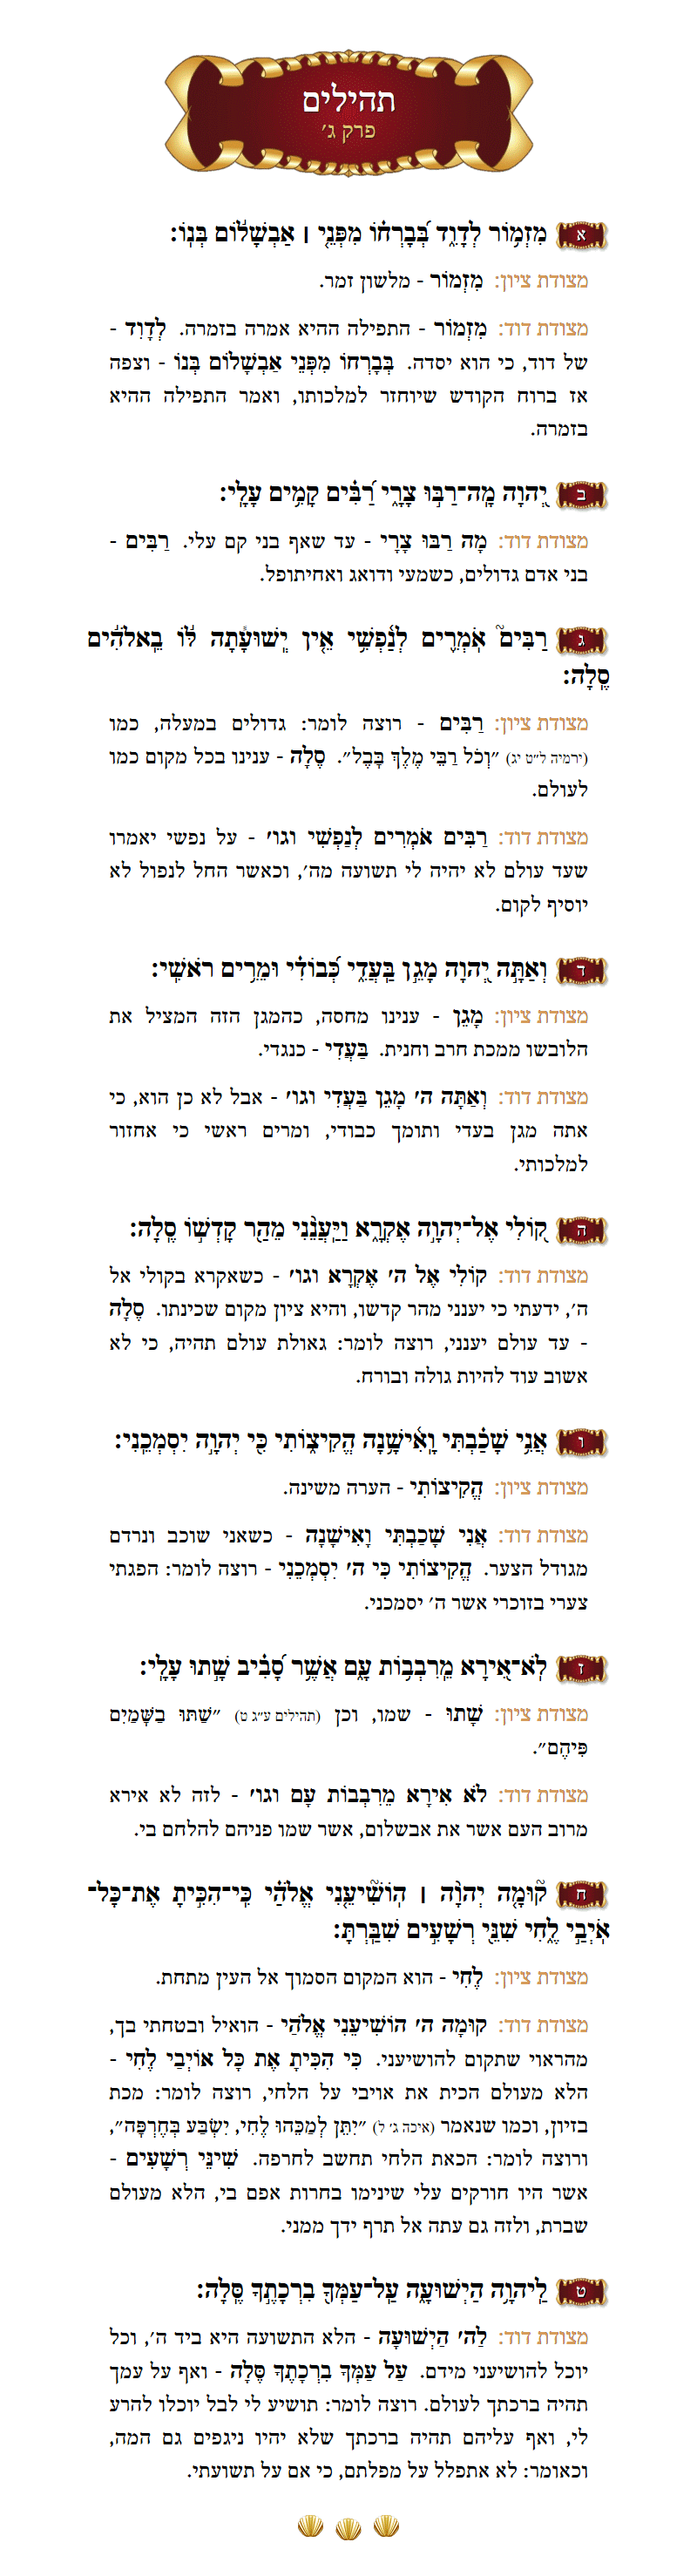 Sefer Tehillim Chapter 3 with commentary